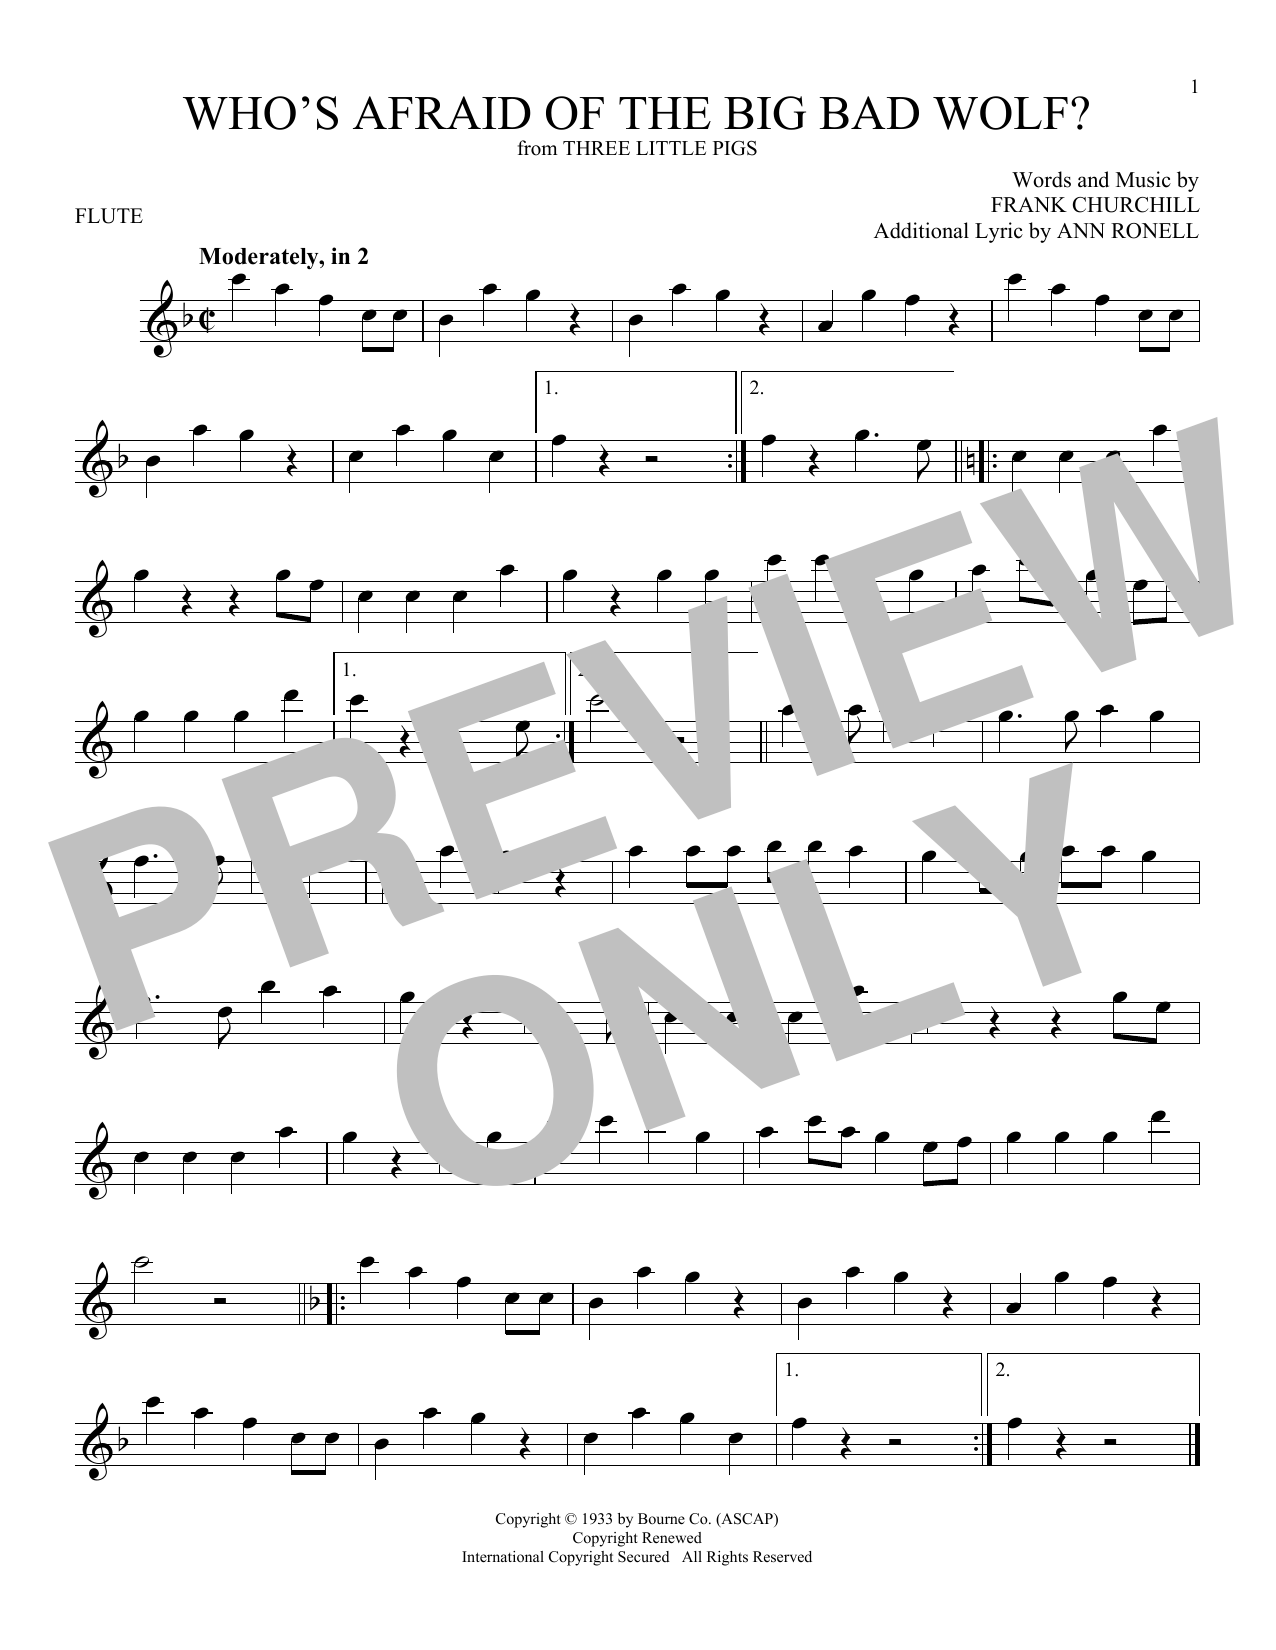 Download Frank Churchill Who's Afraid Of The Big Bad Wolf? Sheet Music